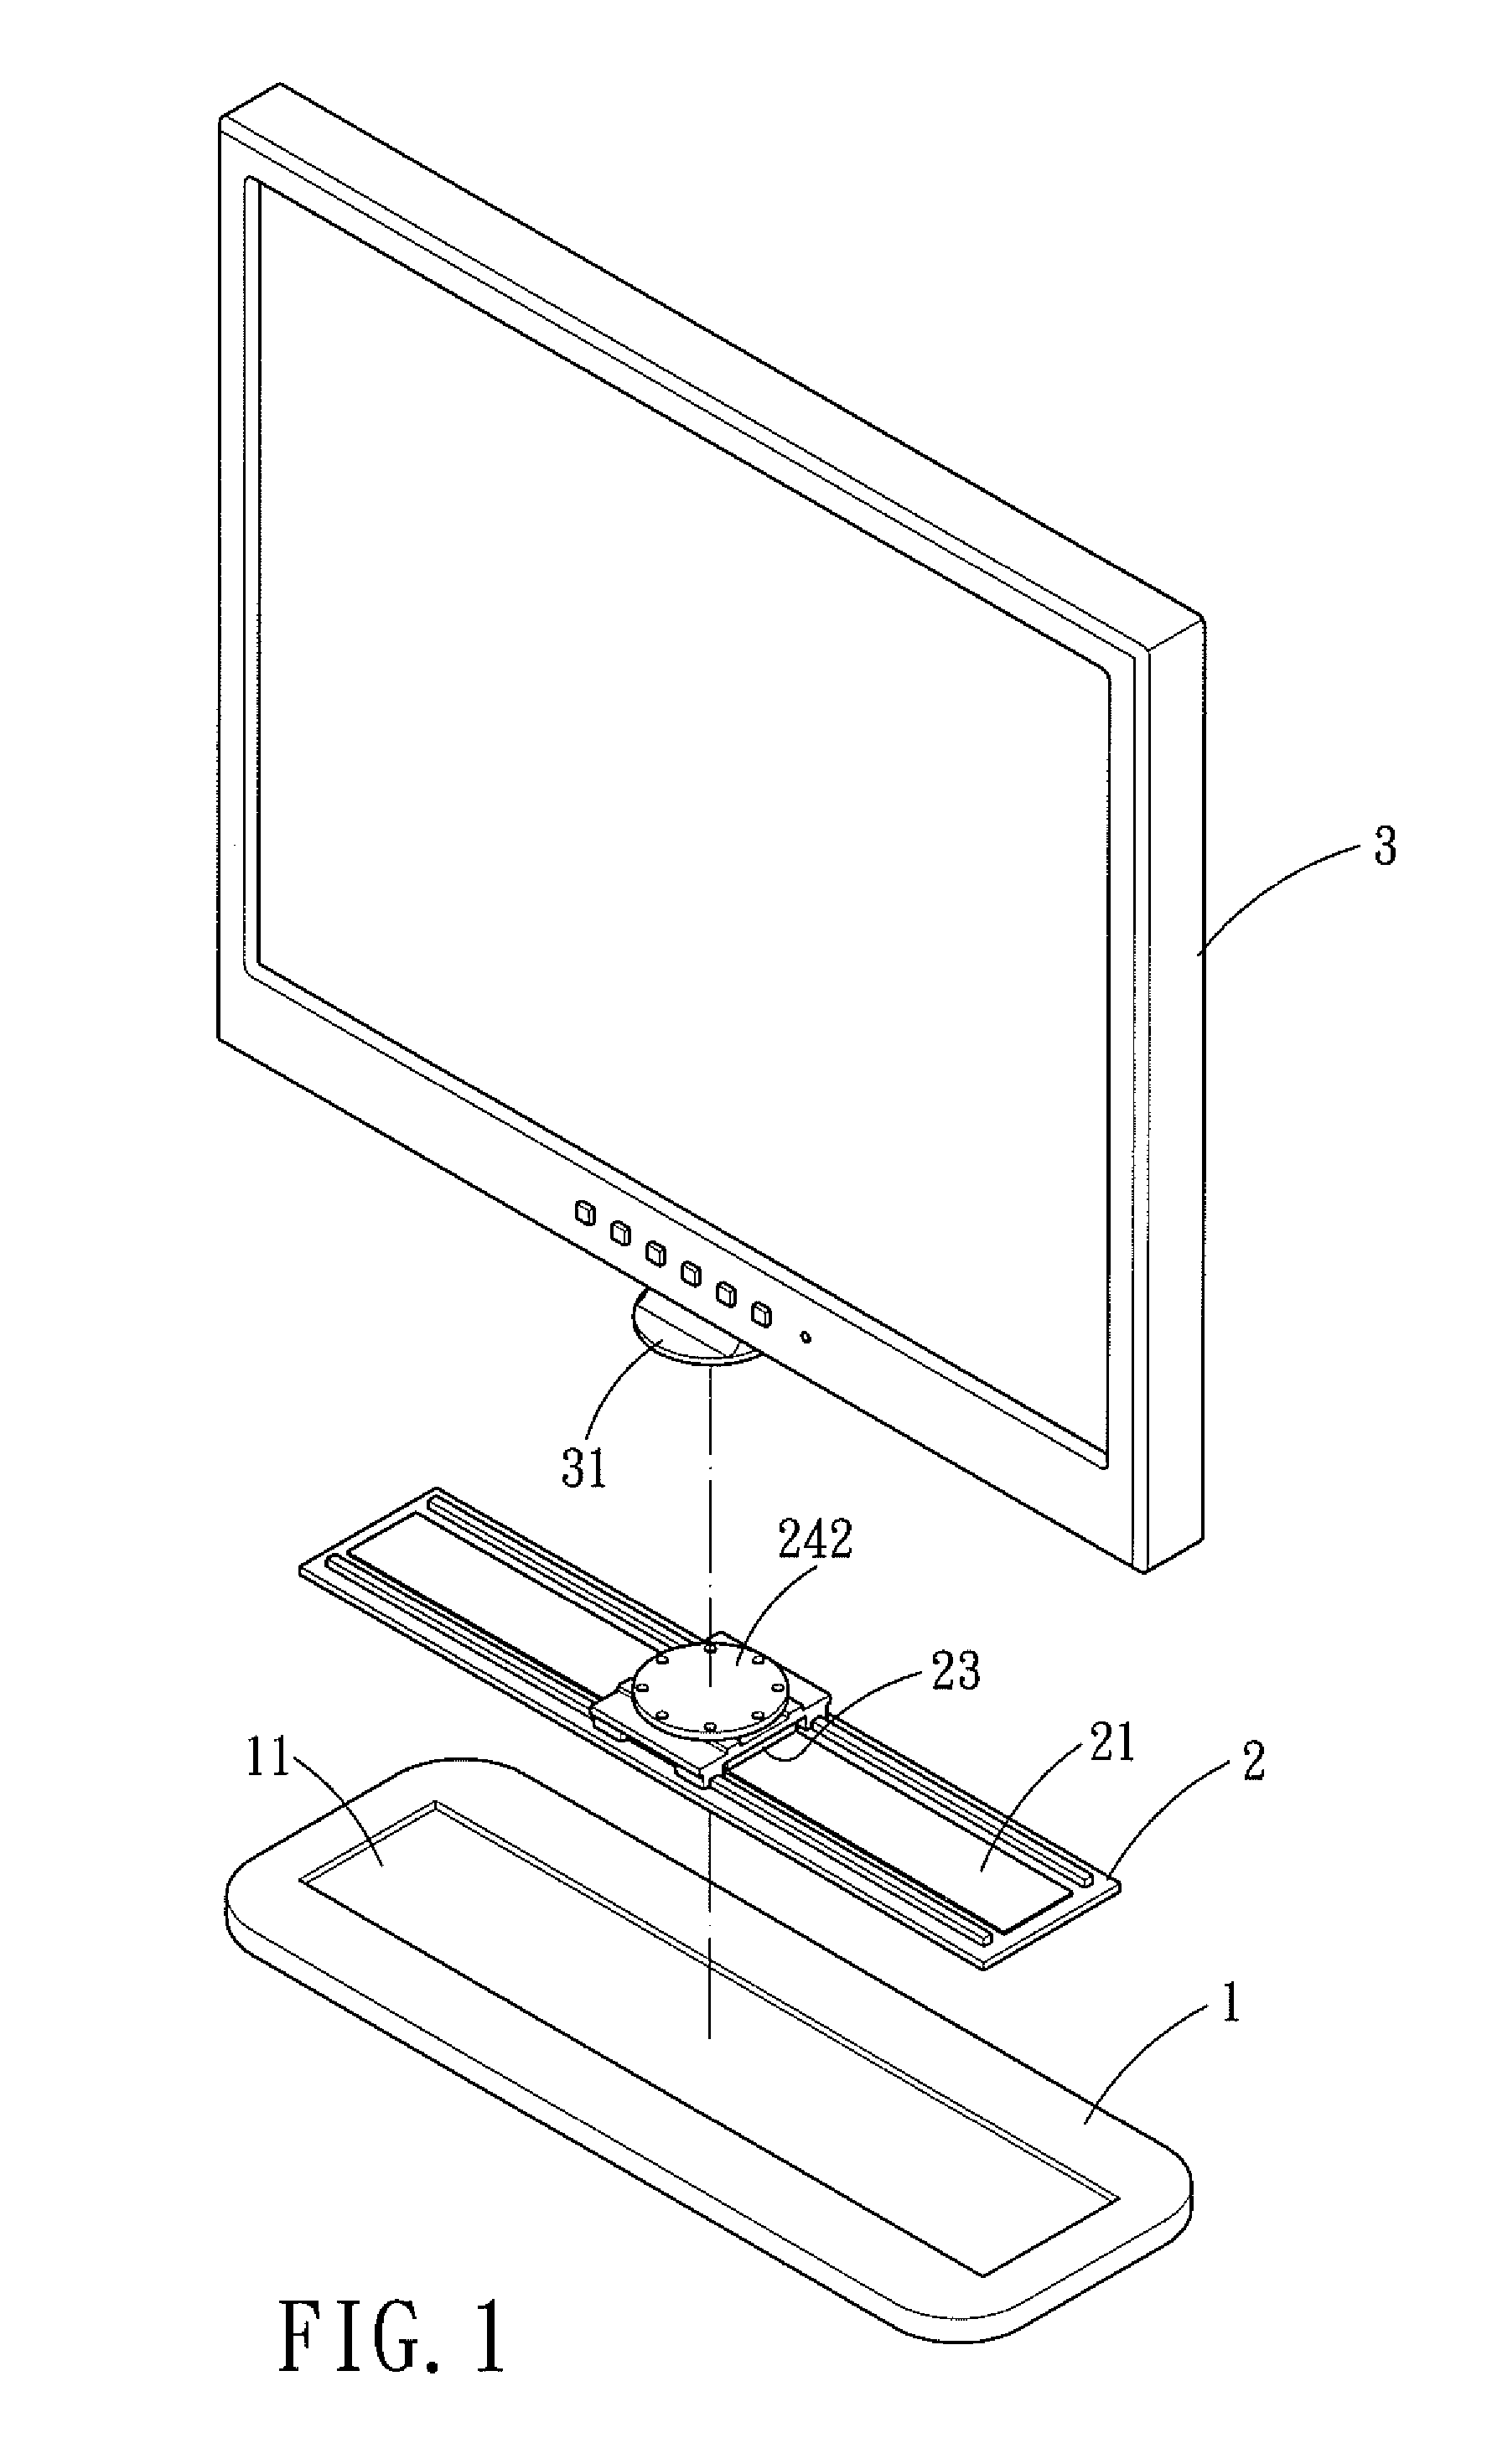 Display with a linear driving device